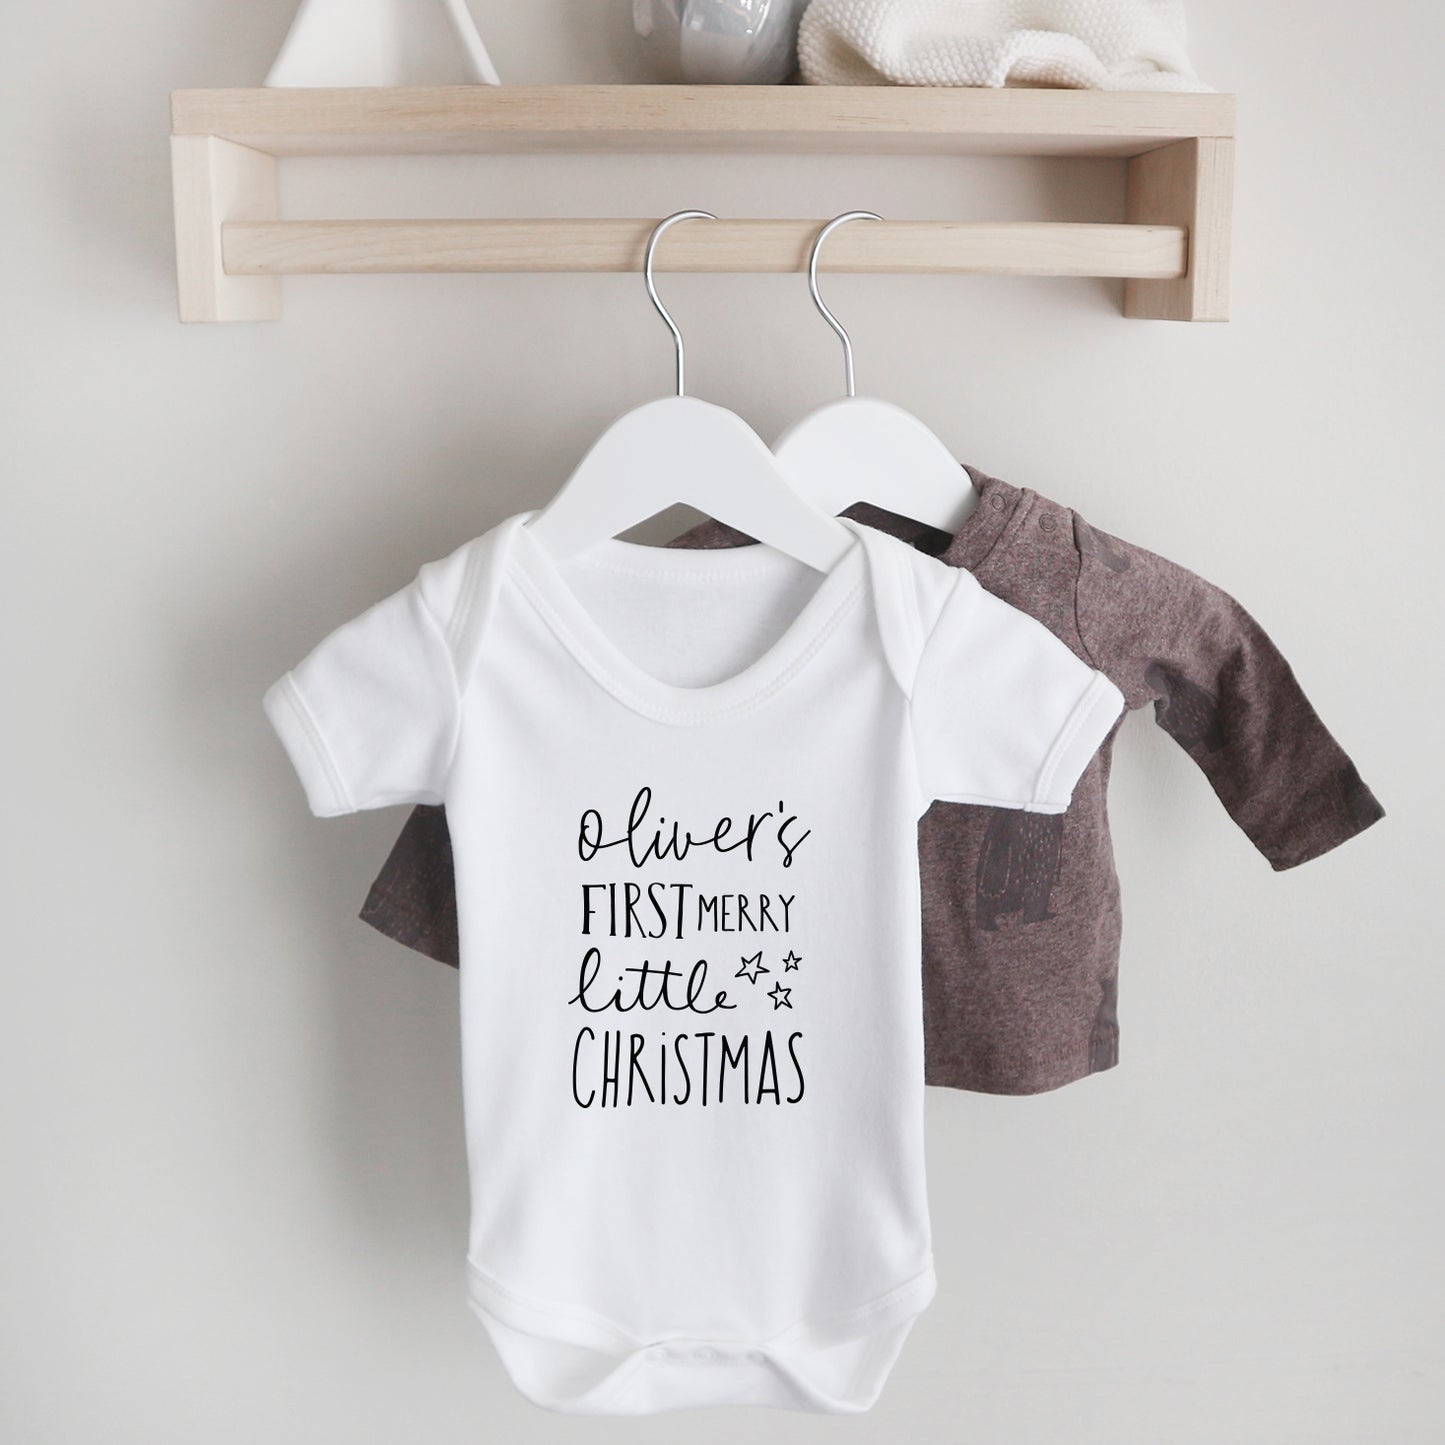 Personalised baby's first merry Christmas bodysuit Baby Paper and Wool